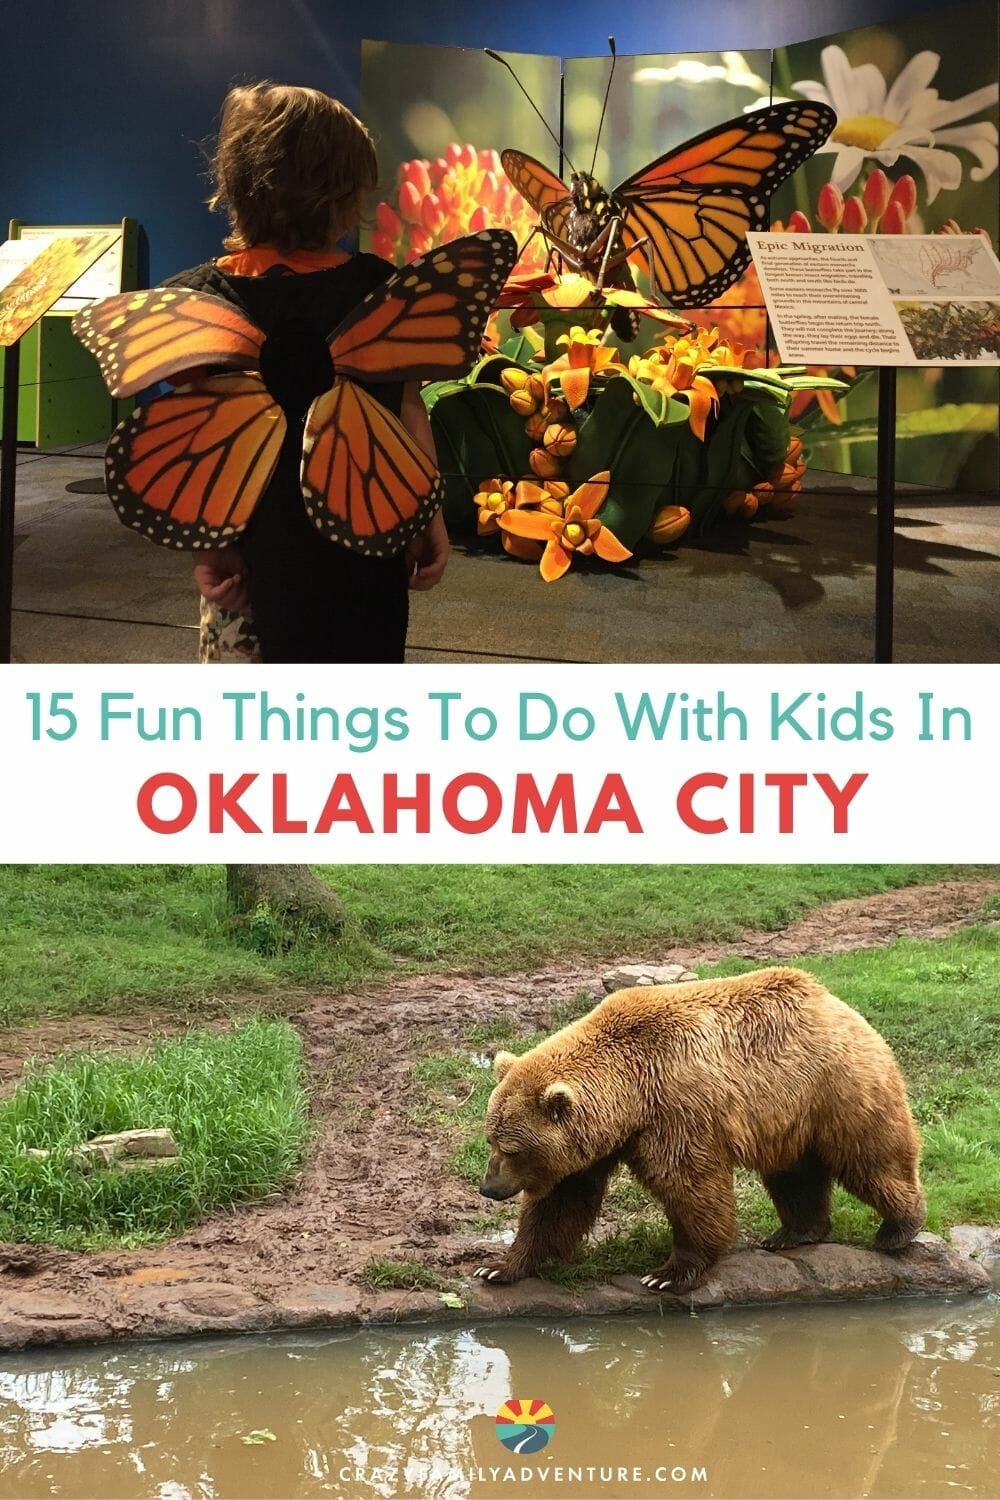 OKC offers museums, outdoor activities and theme parks! You might just be surprised by all of the things to do in Oklahoma City with kids!